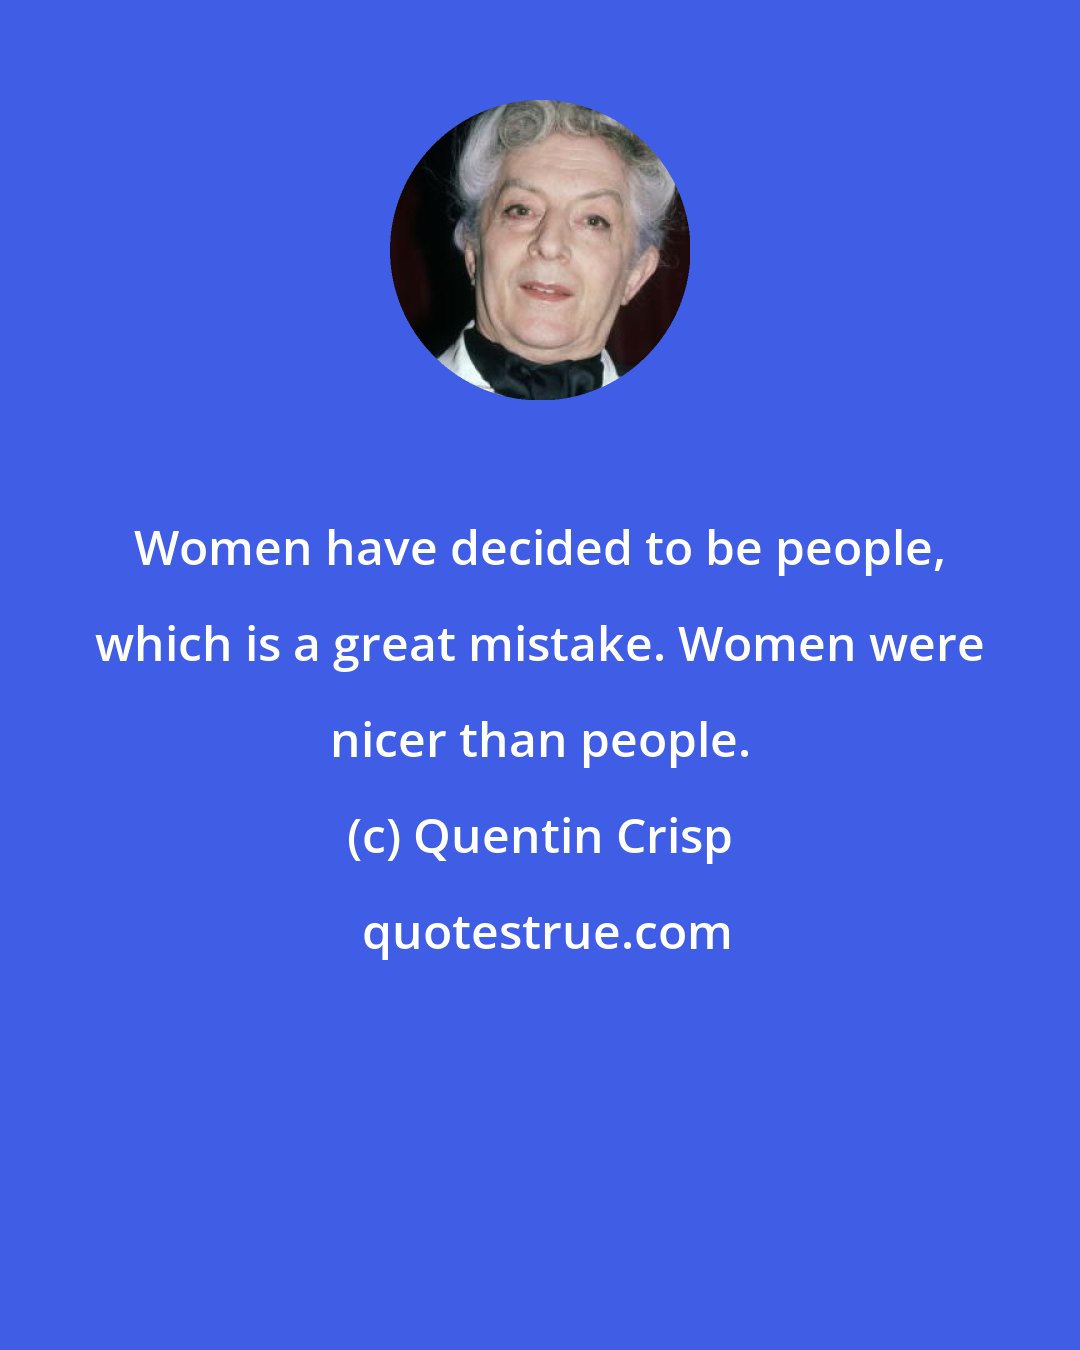 Quentin Crisp: Women have decided to be people, which is a great mistake. Women were nicer than people.